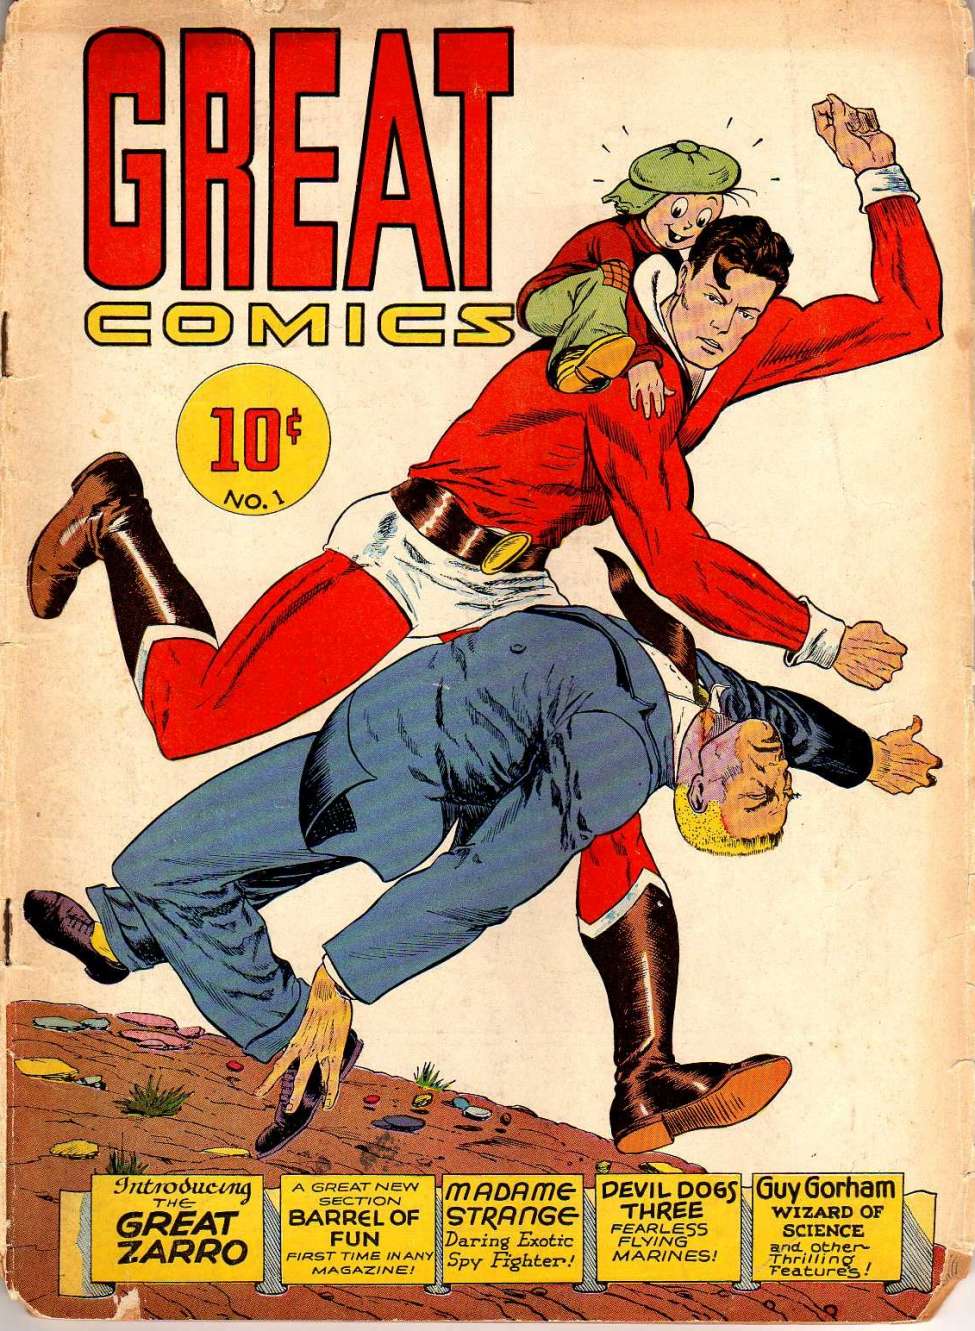 Book Cover For Great Comics 1